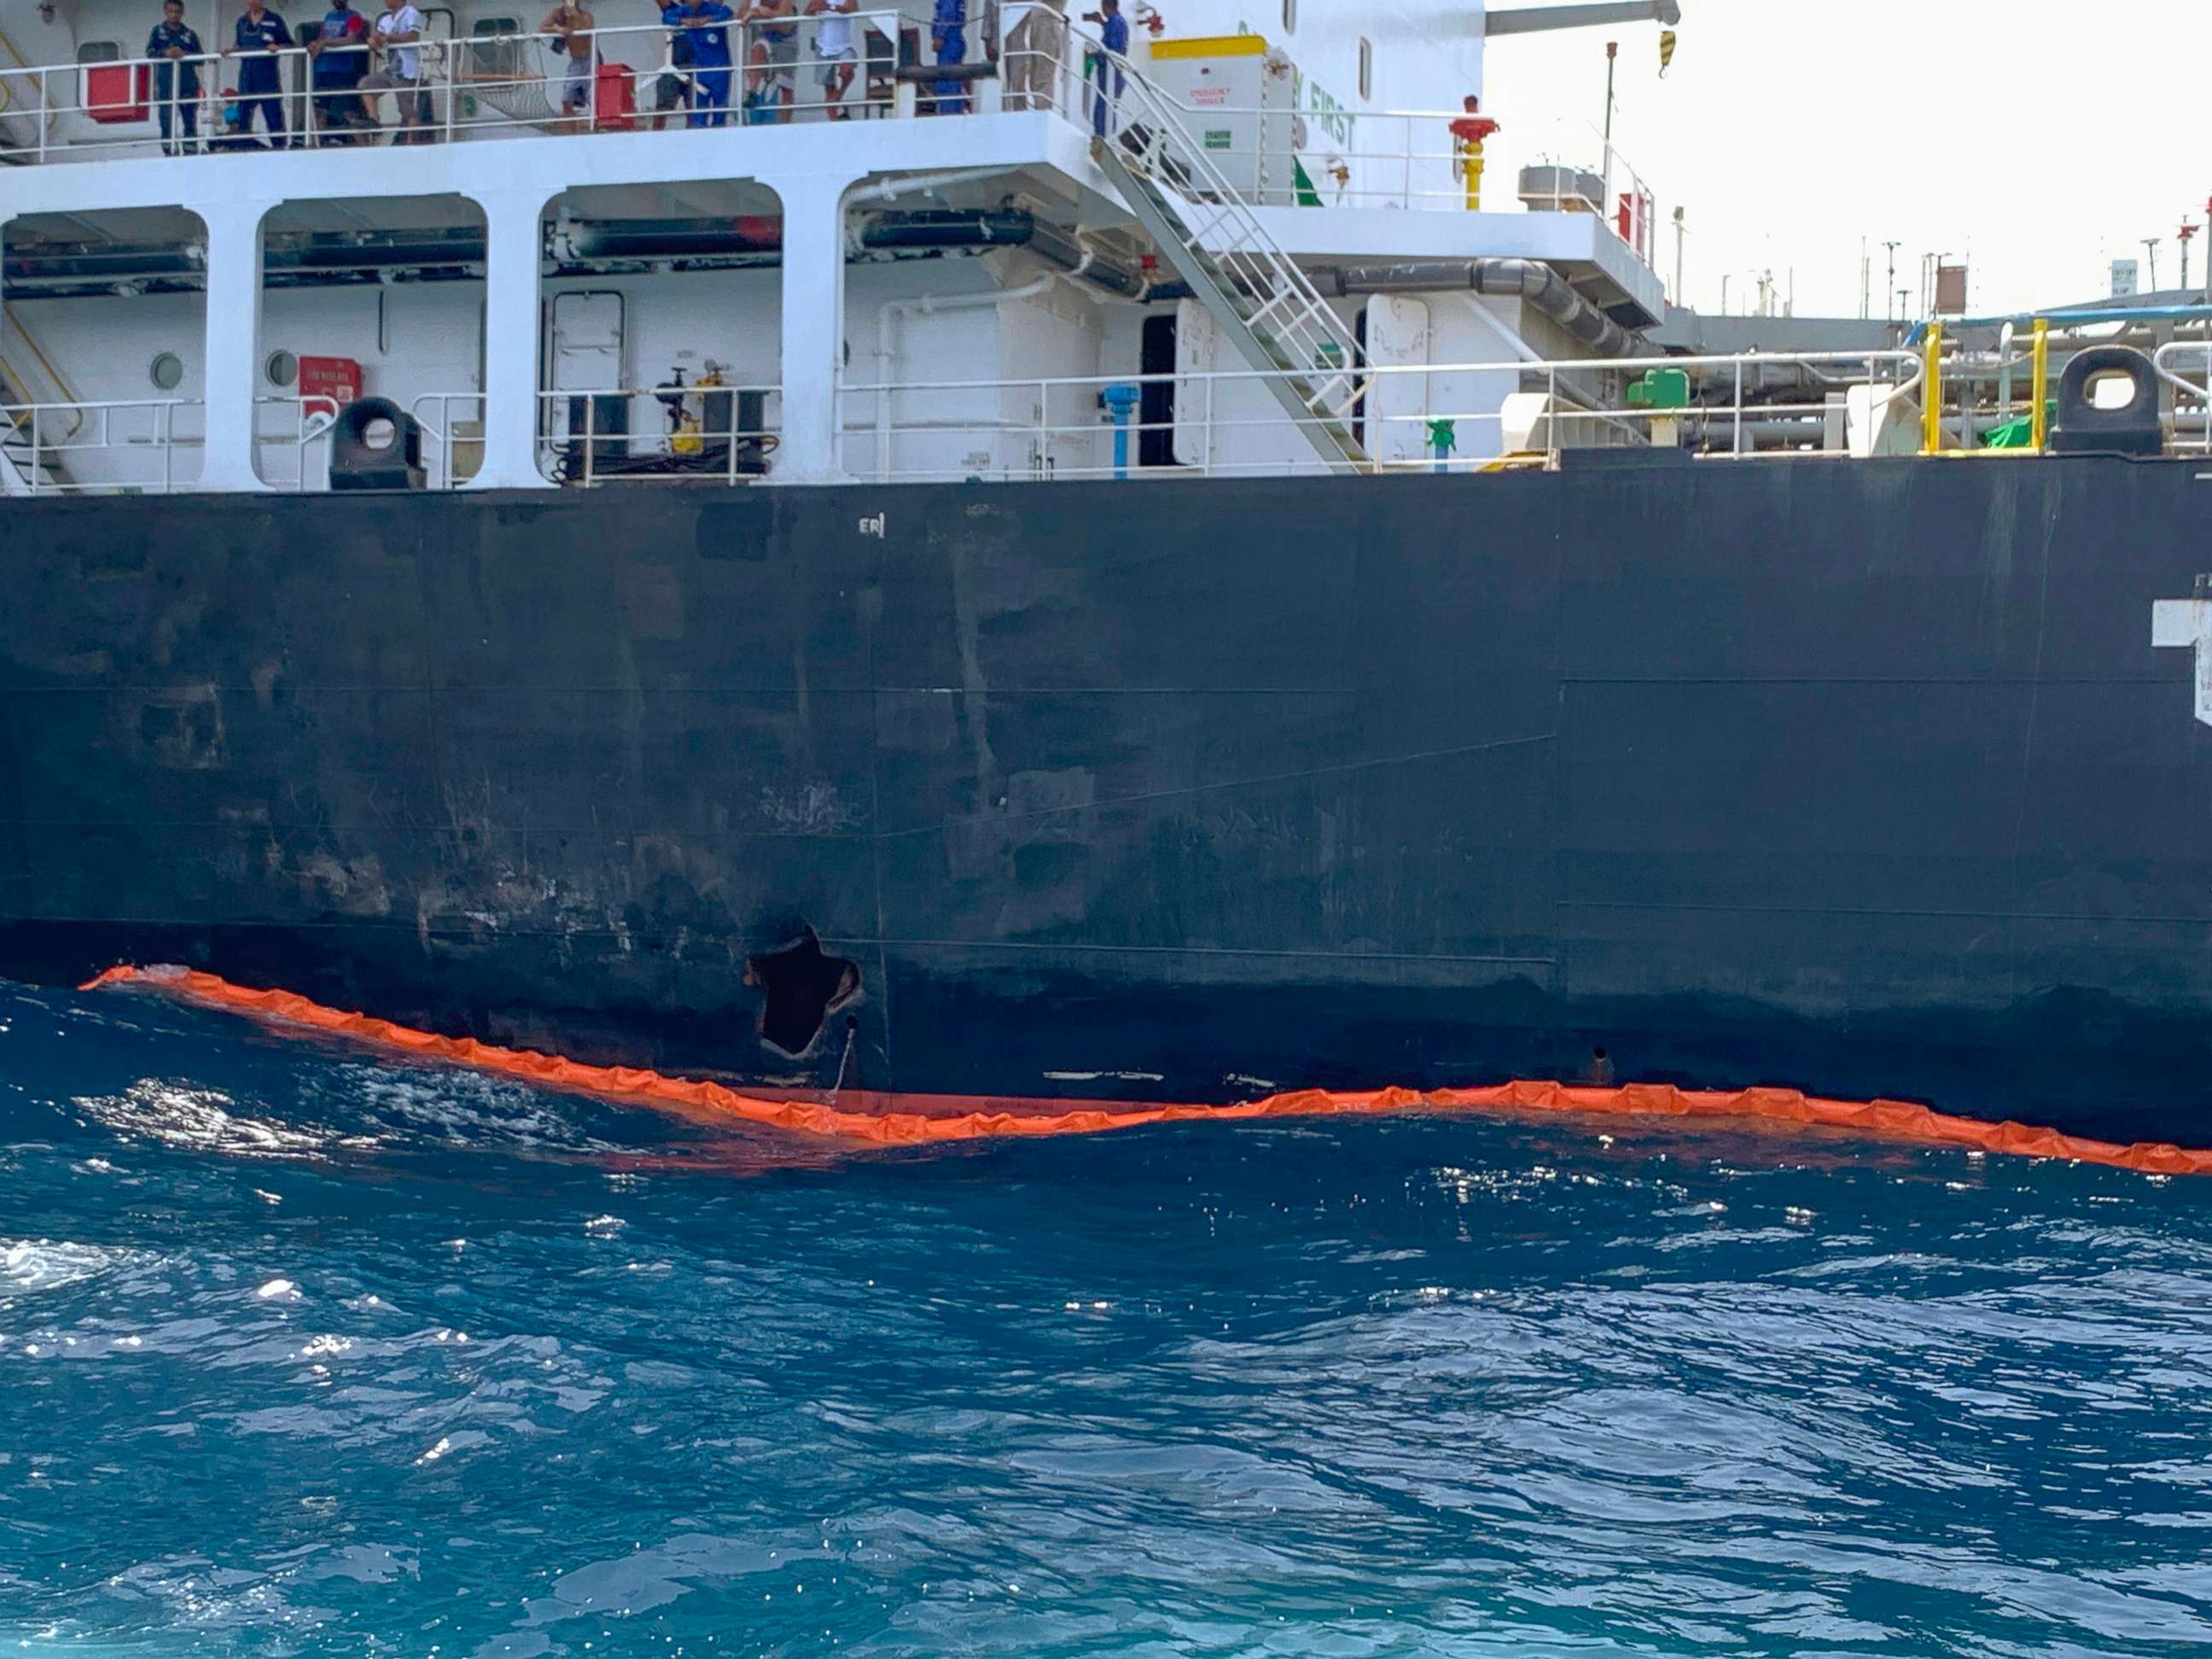 PHOTO: The damage to the Japanese oil tanker Kokuka Courageous from a limpet mine attack in the Gulf of Oman can be seen as the ship sails off the coast the United Arab Emirates, June 19, 2019.